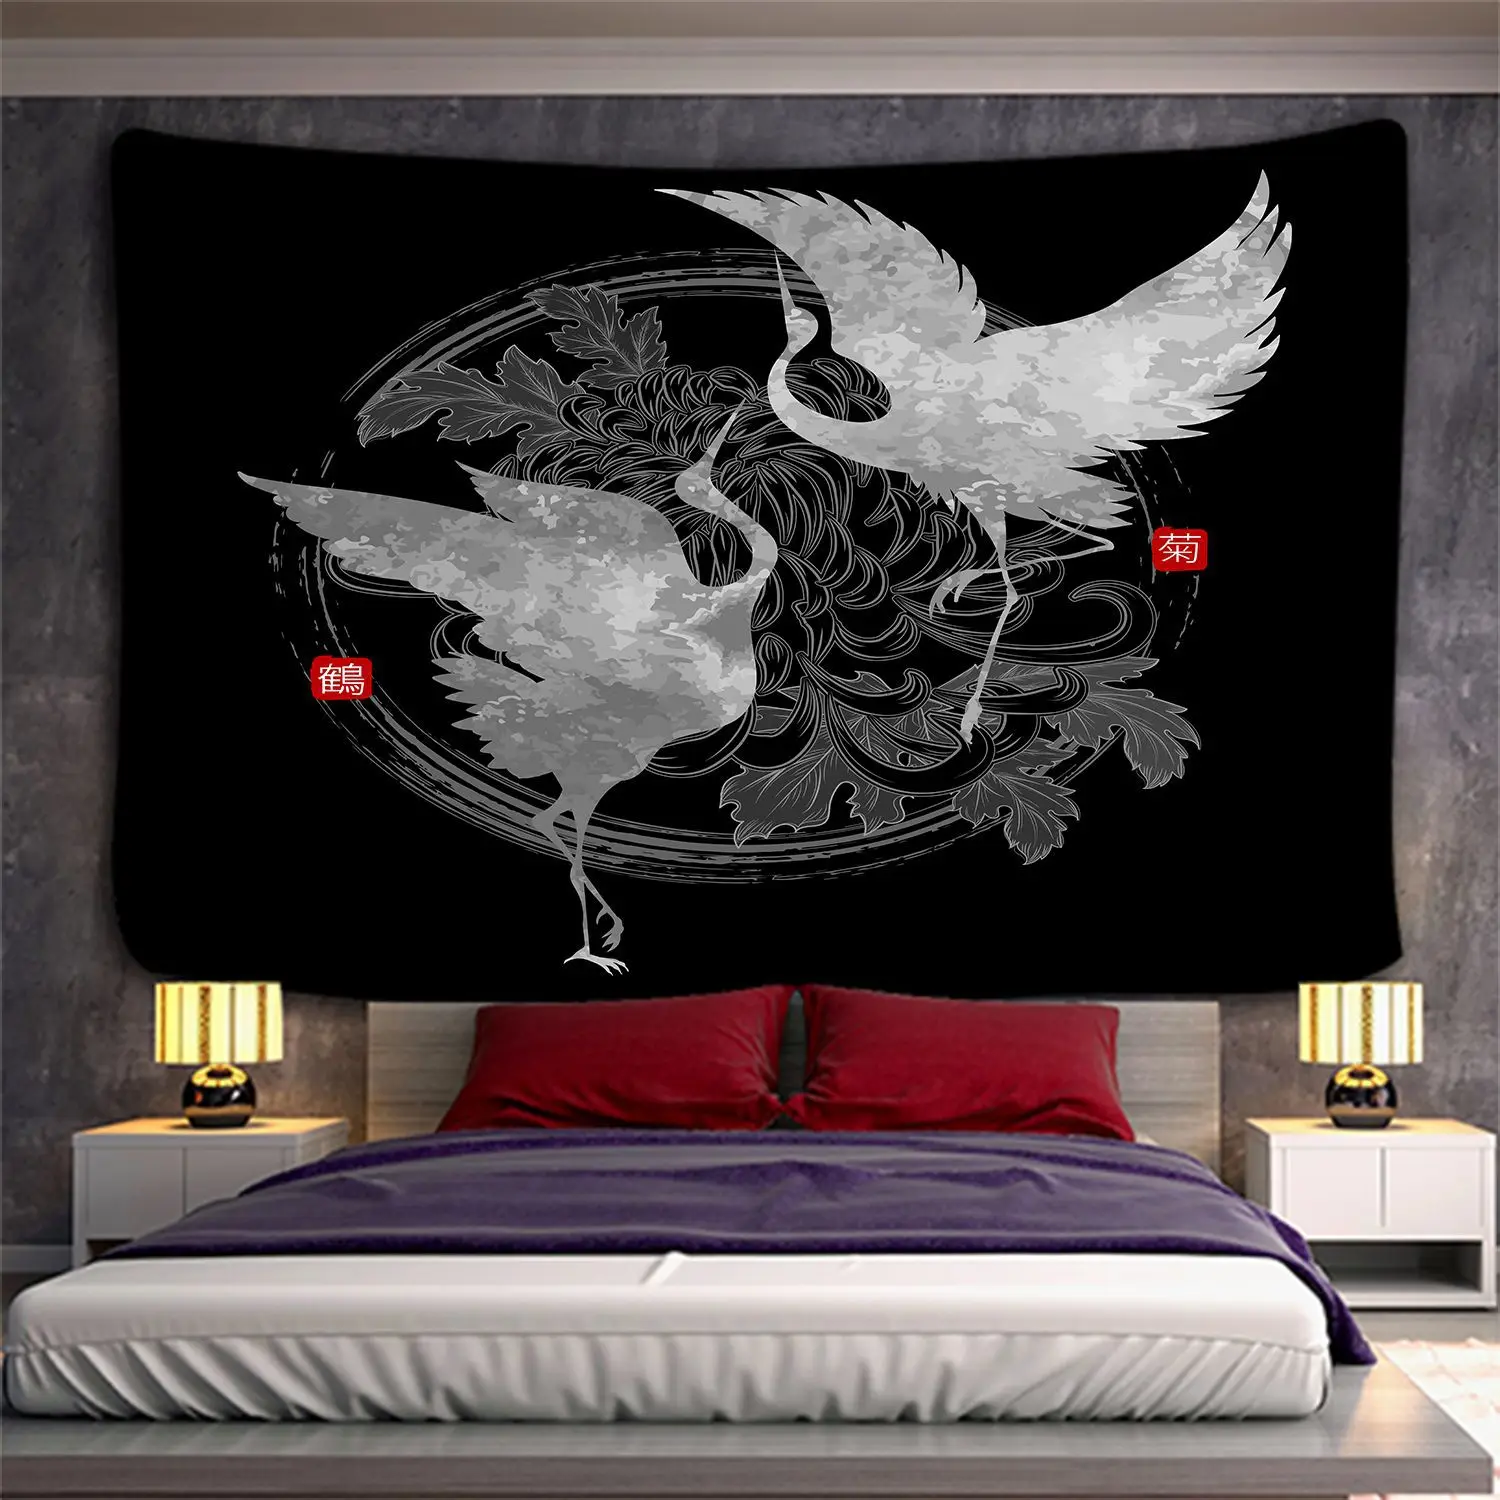 Samurai Pattern Tapestry Wall Hanging Chinese Flying Crane Art Wall Cloth Carpet Background Beach Towel Home Decoration